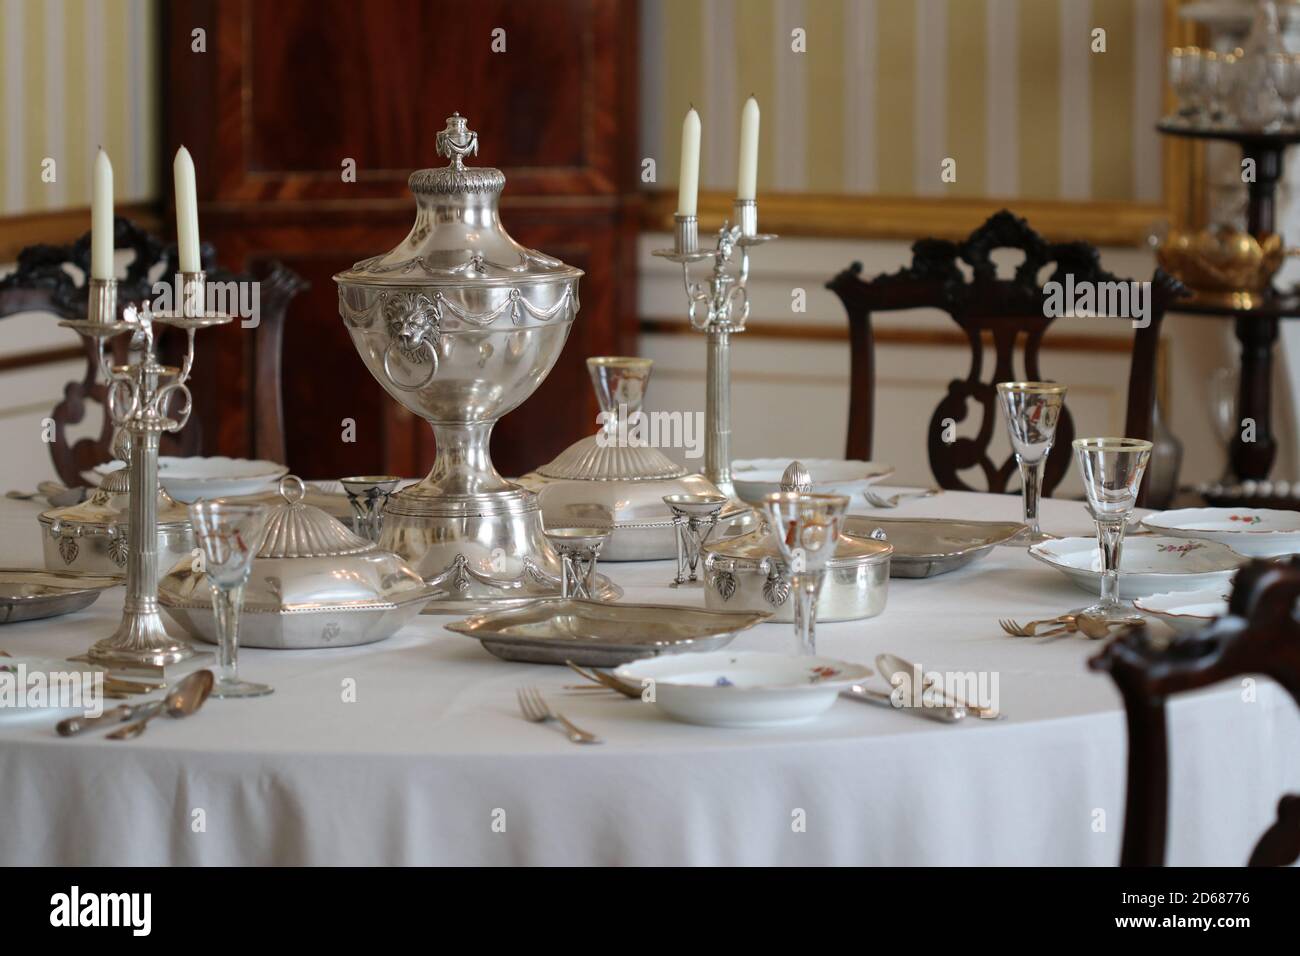 Old vintage silver tableware set out on table with white tablecloth in  vintage interior Stock Photo - Alamy